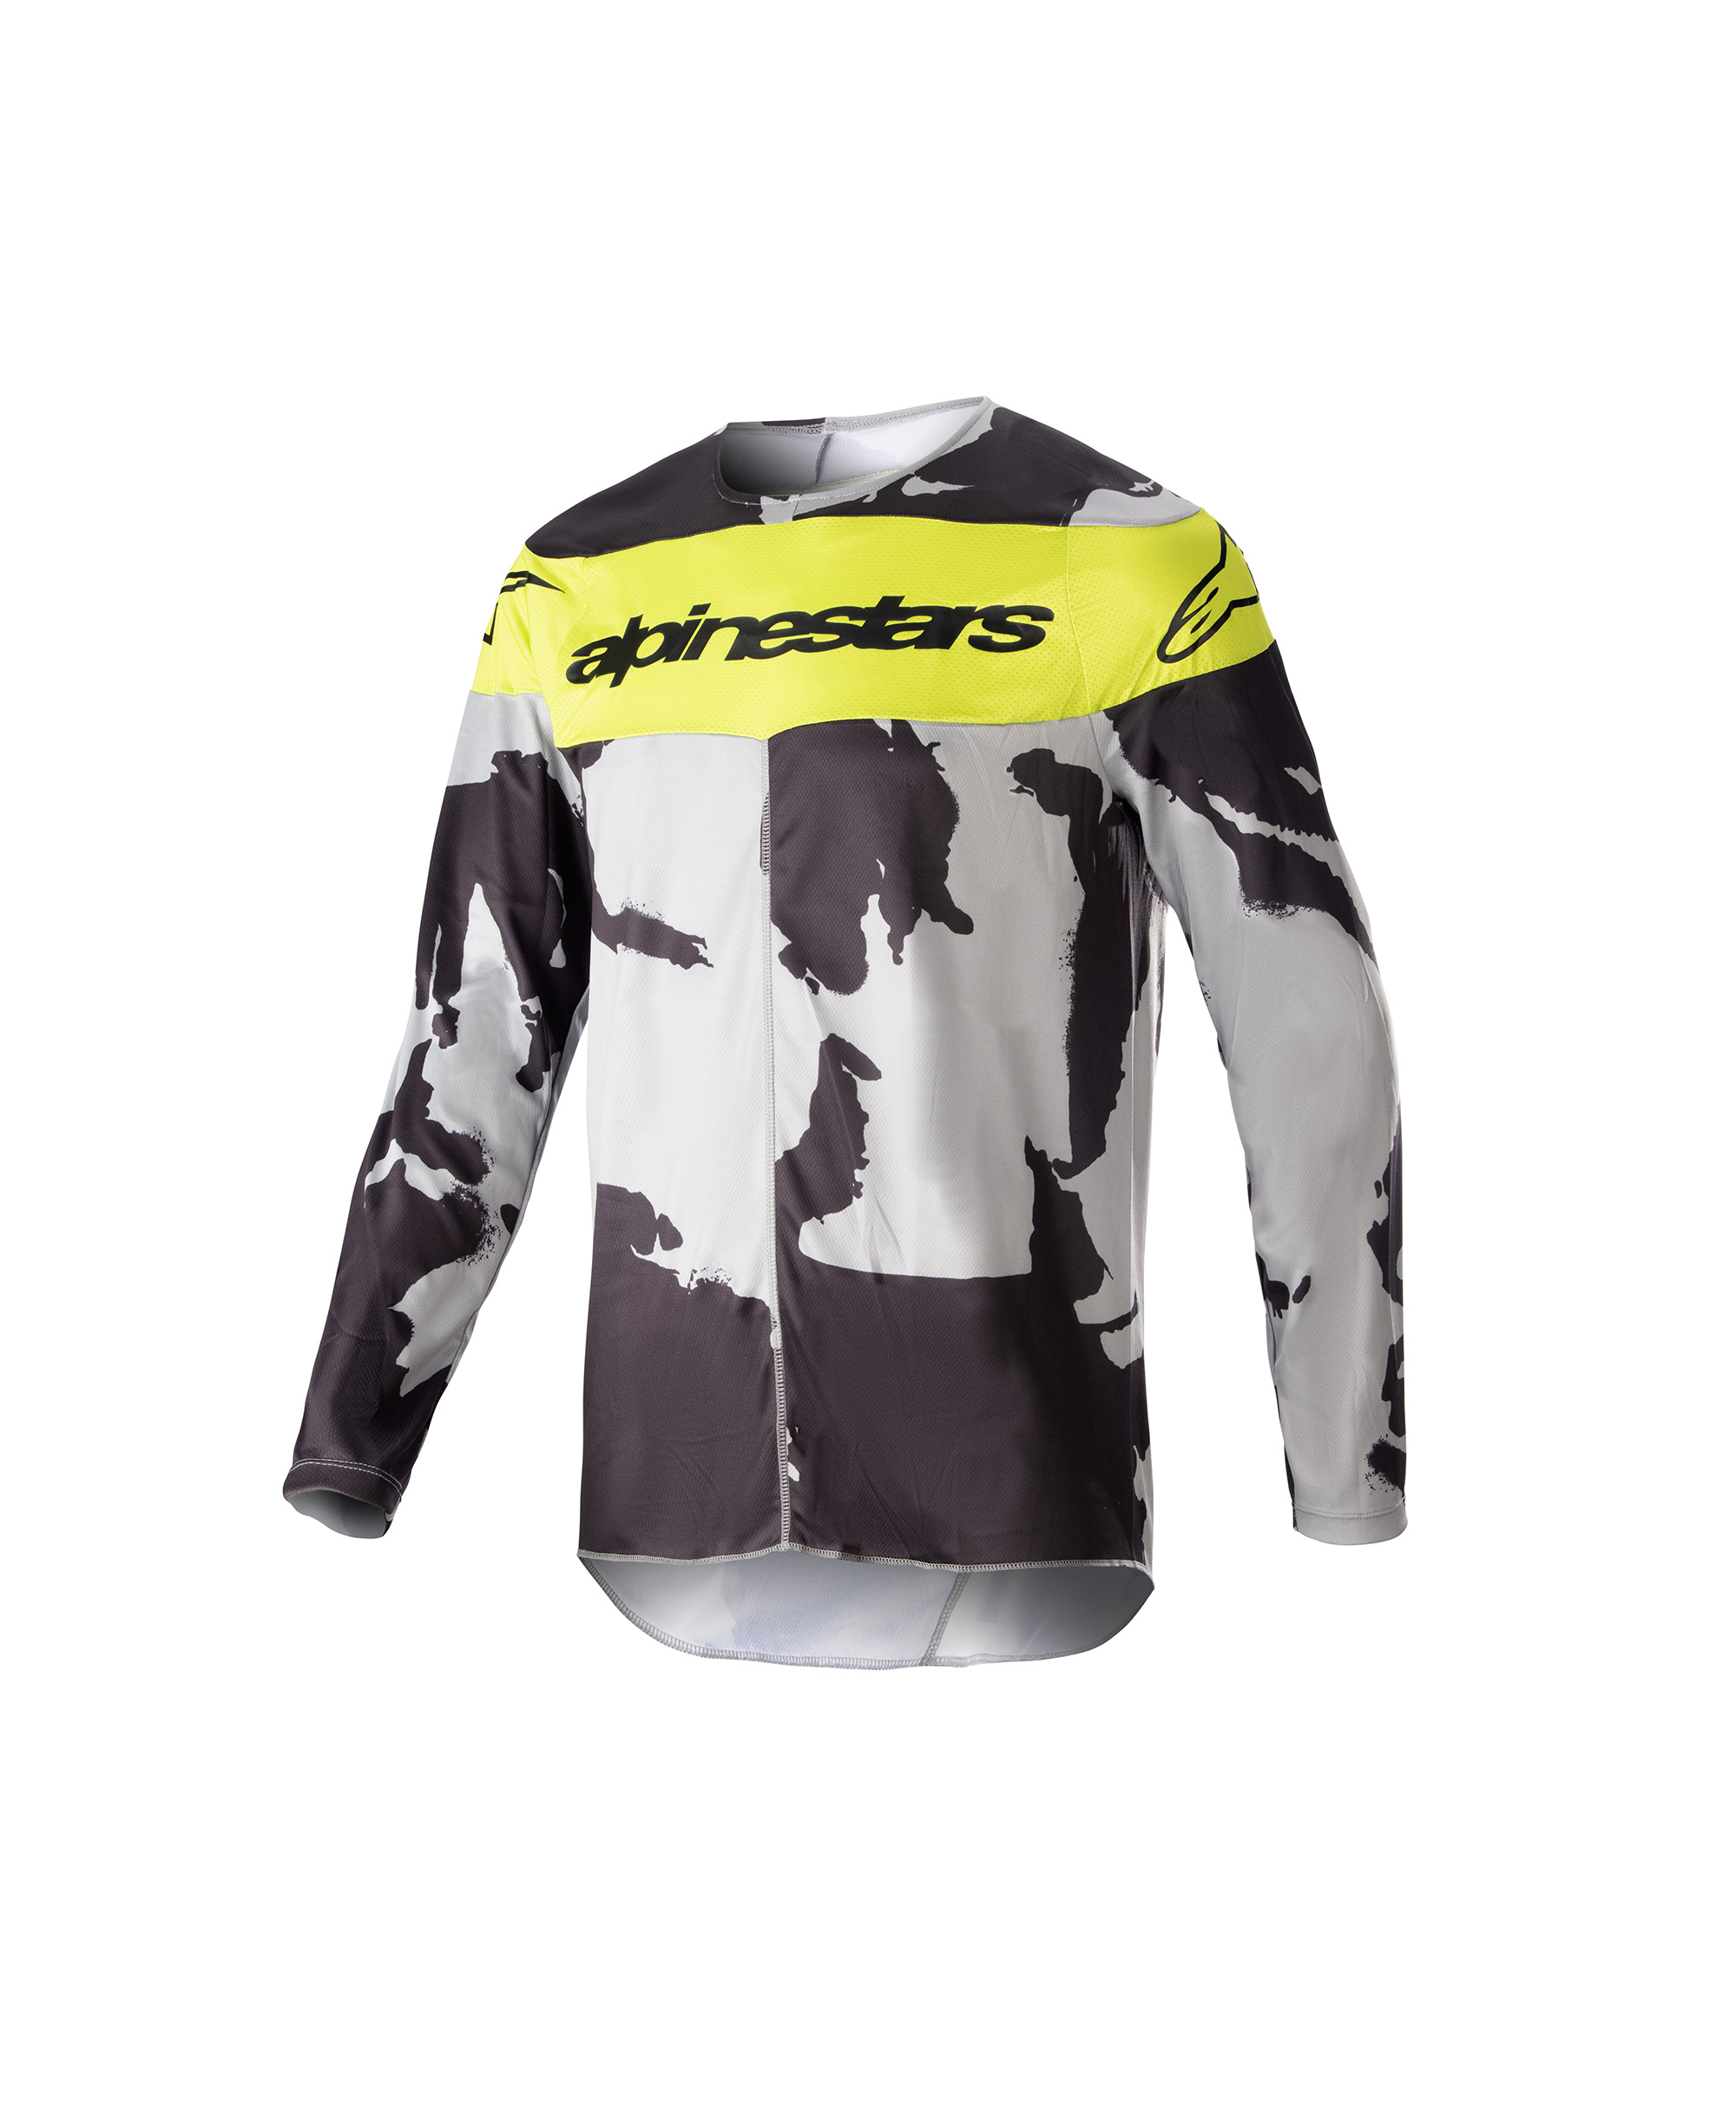 RACER TACTICAL JERSEY CAST GRAY CAMO YELLOW FLUO